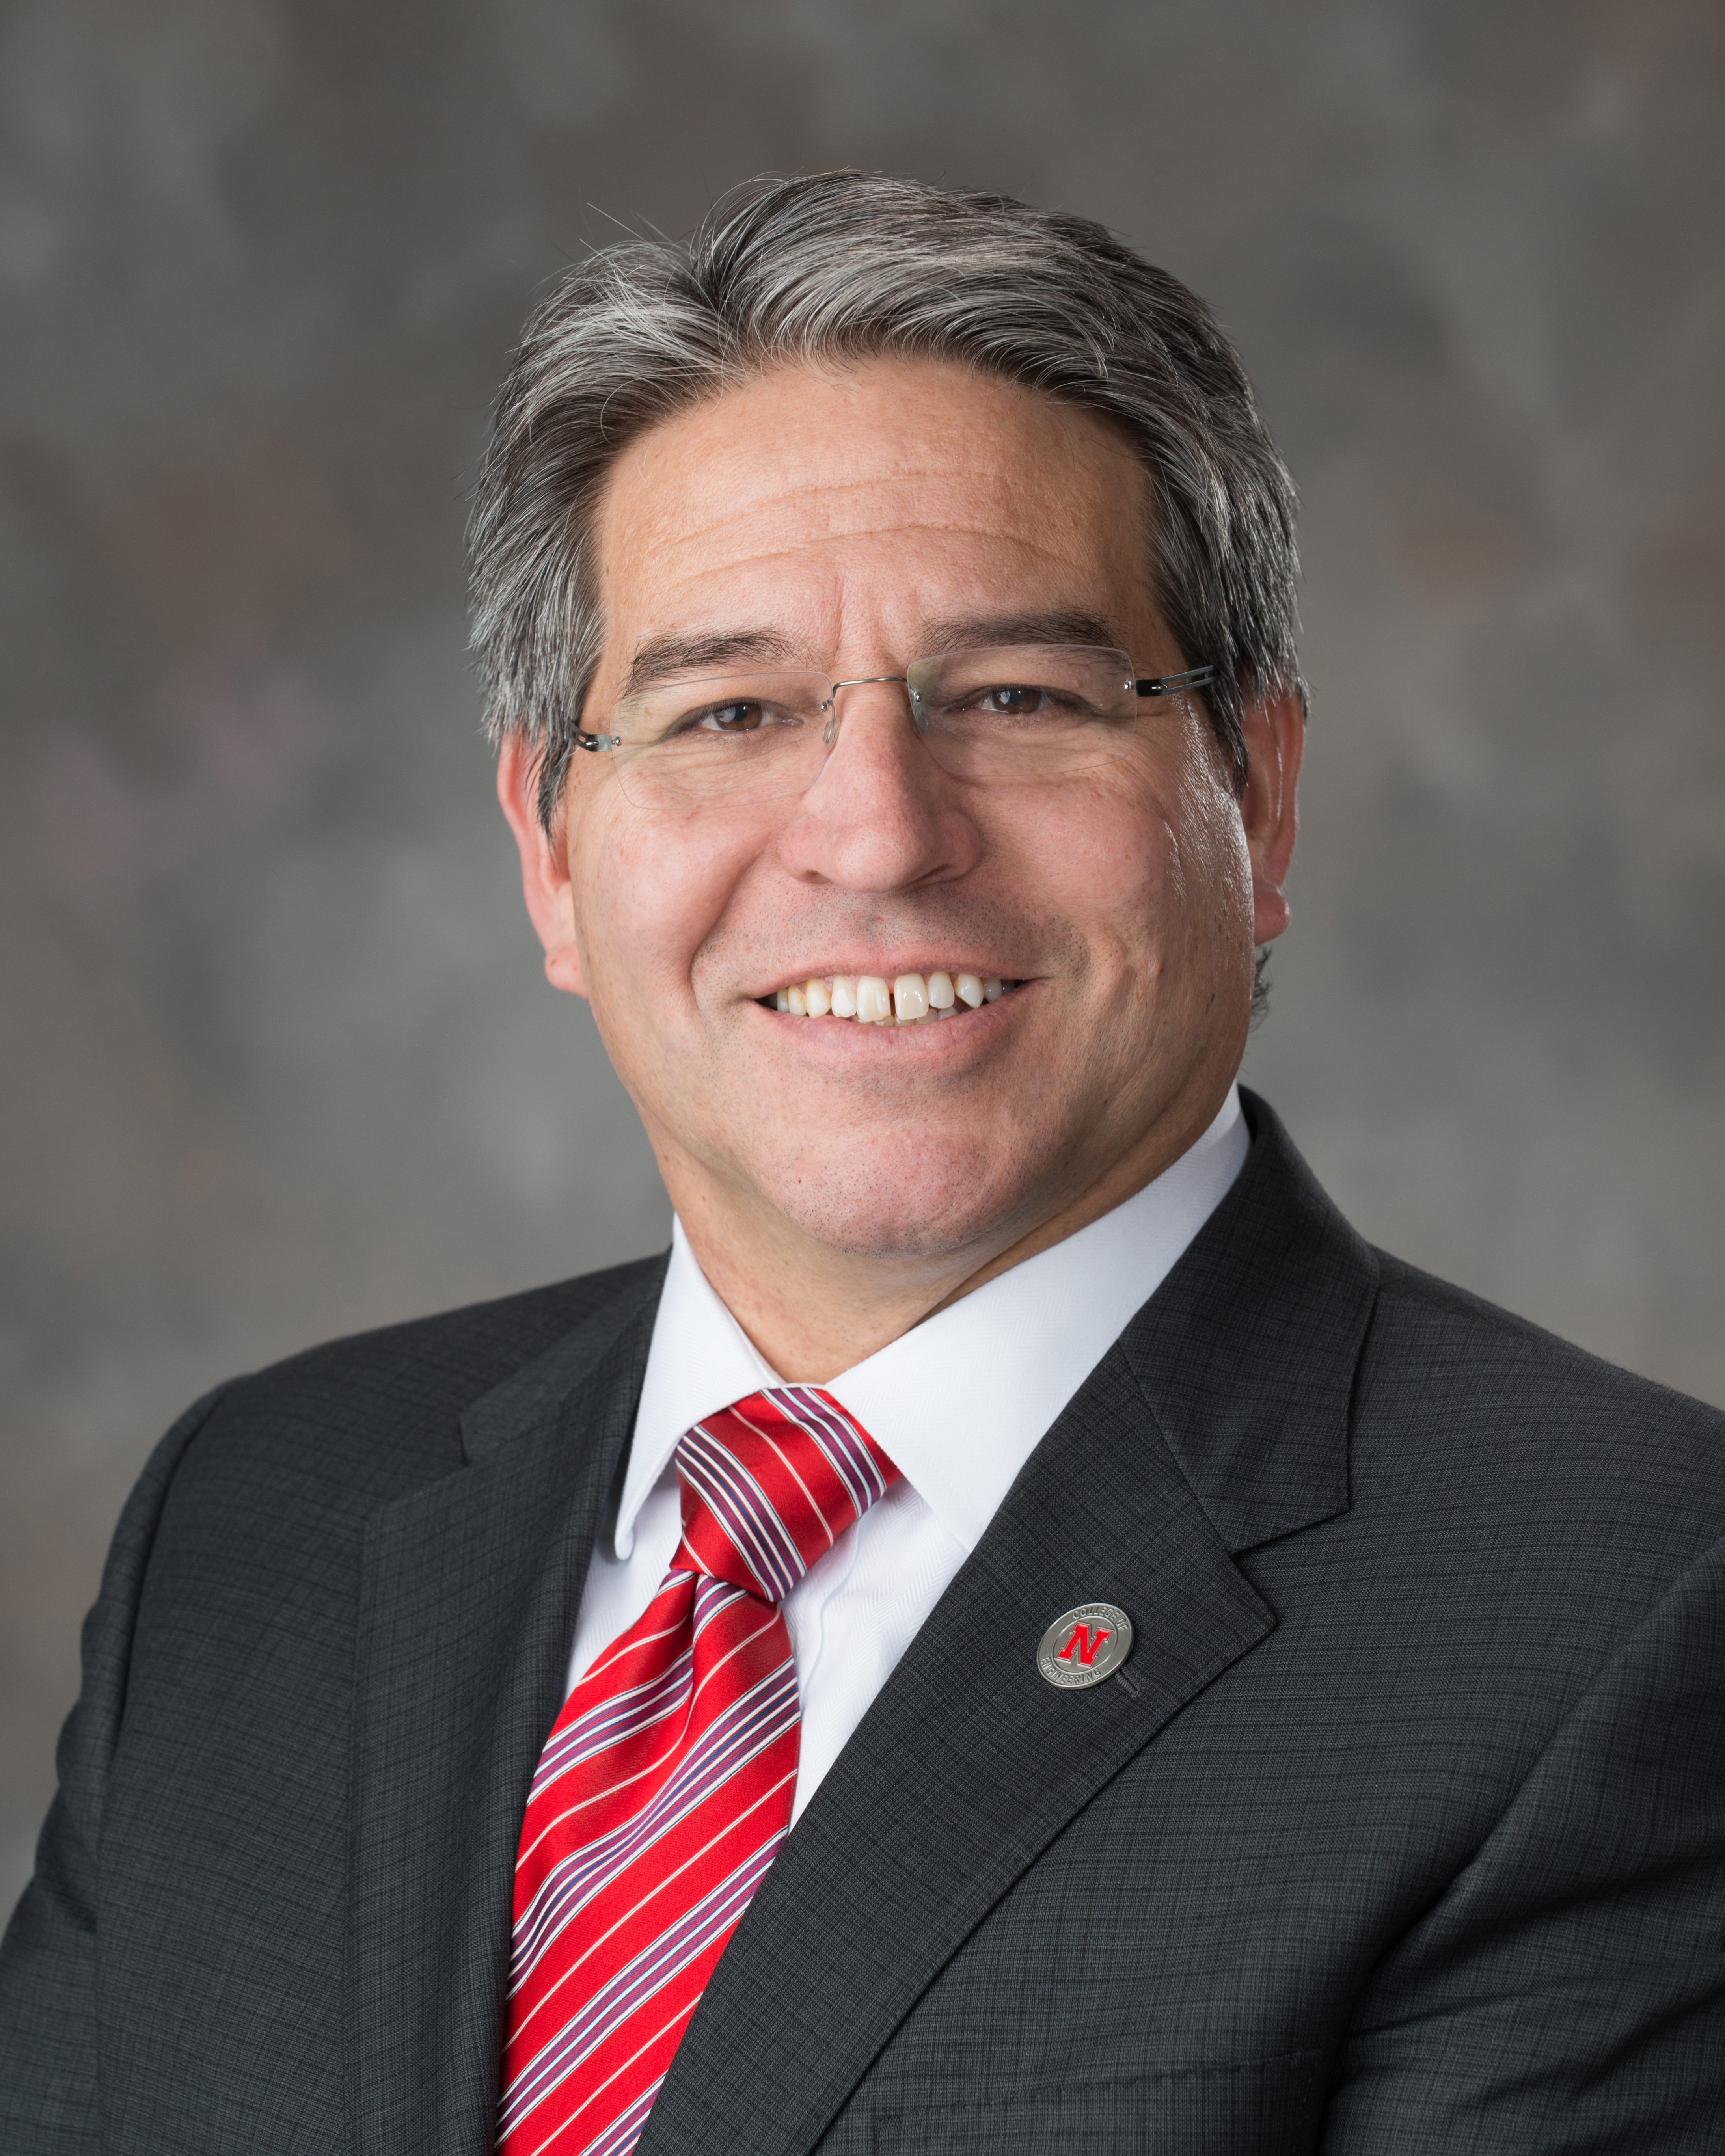 Come meet Dean Lance C. Pérez during Office Hours with the Dean on Oct. 1 (City Campus) and Oct. 2 (Scott Campus).